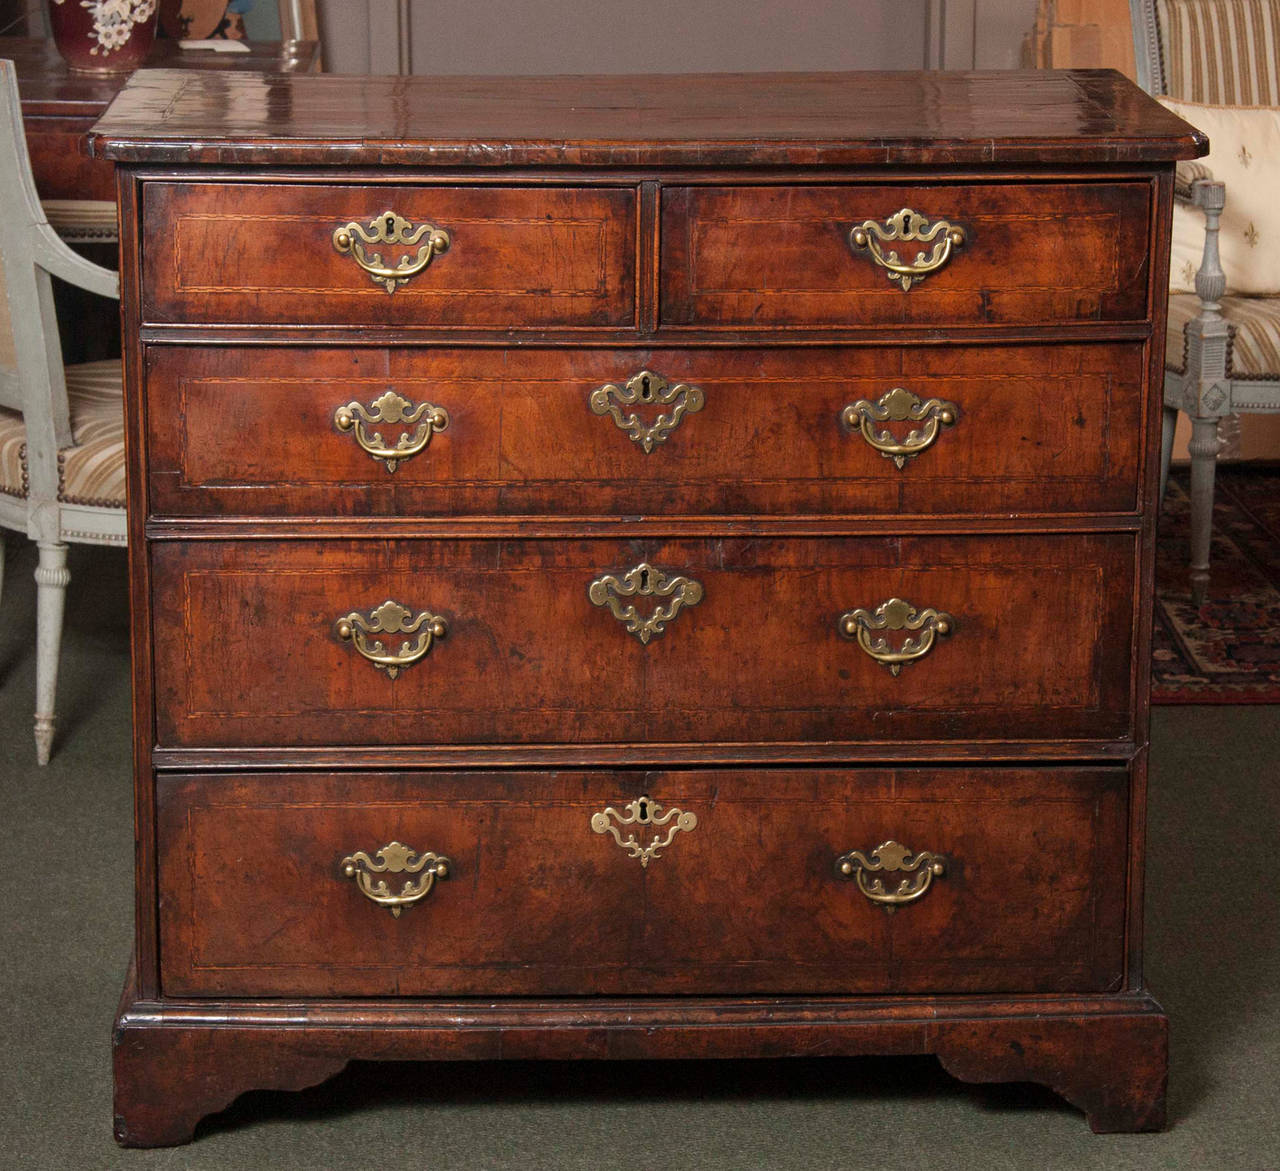 An English early 18th century George I walnut chest of drawers with excellent colour and patination; retaining it's original period brass hardware.